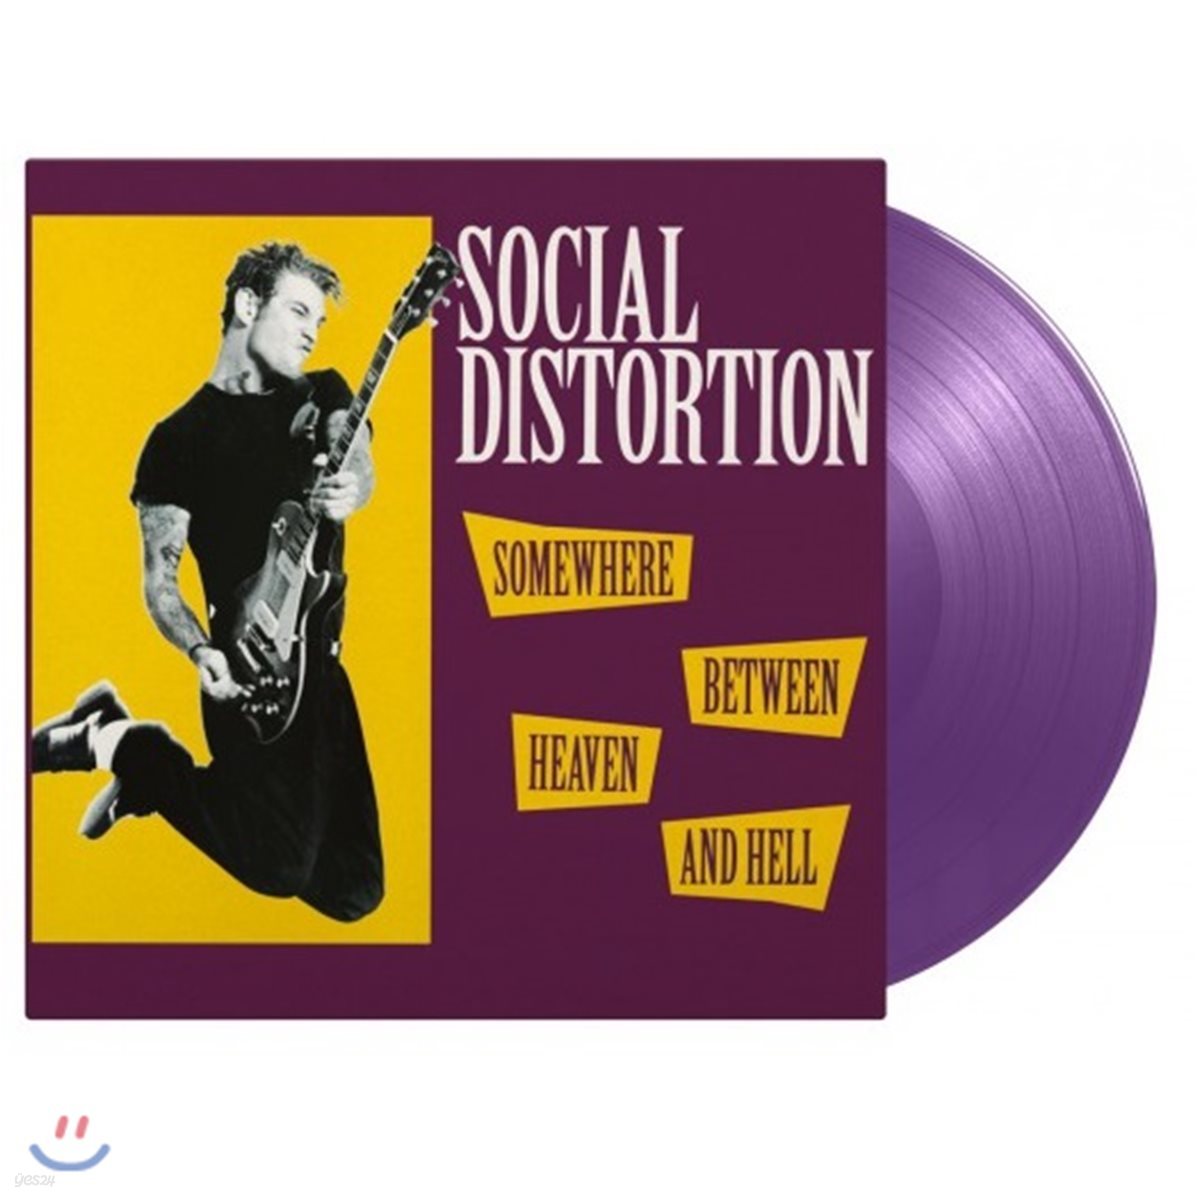 Social Distortion (소셜 디스토션) - Somewhere Between Heaven And Hell [퍼플 컬러 LP]